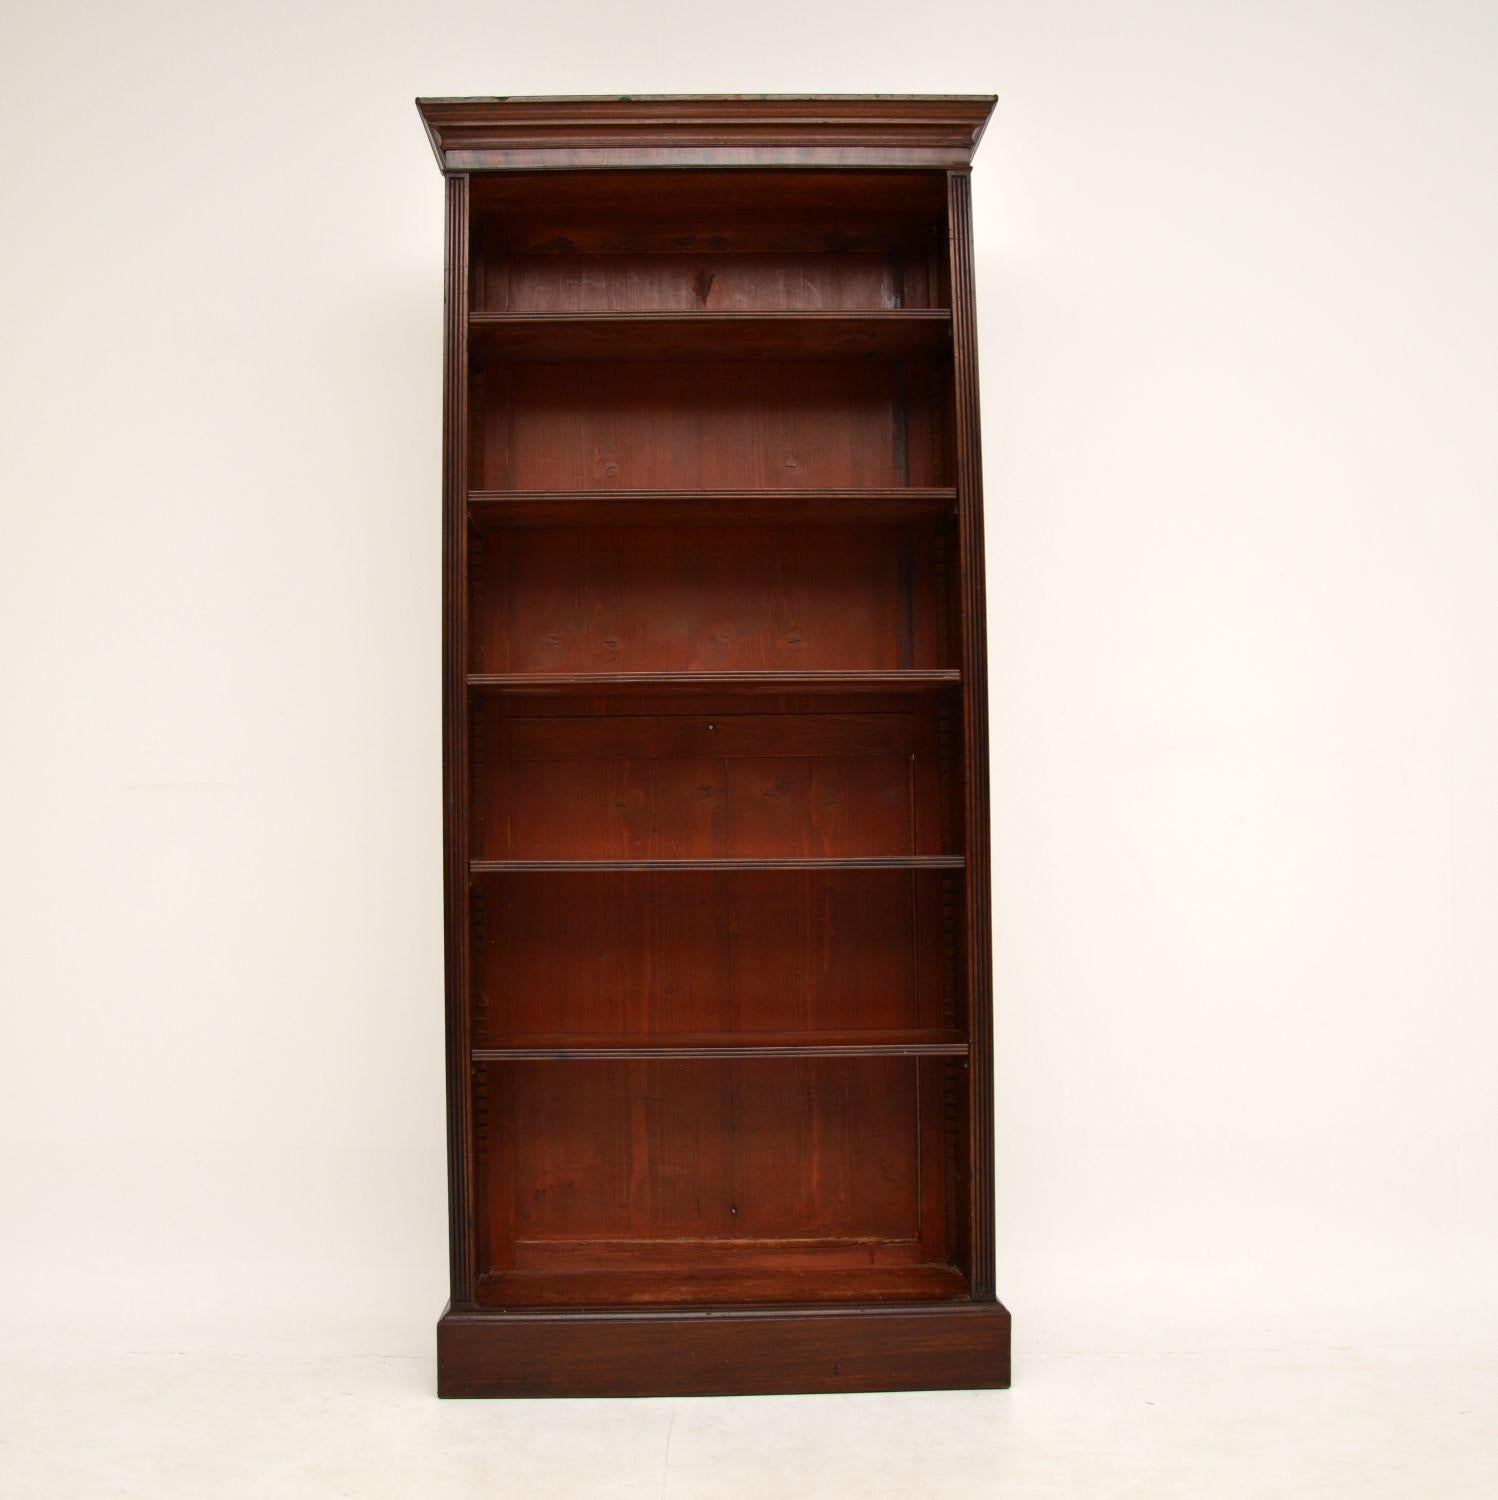 A fantastic original Victorian mahogany open bookcase. This dates from around the 1860-1880 period.

It is of amazing quality and is a very useful size. This is made from solid and veneered mahogany, it has five adjustable shelves with shark teeth